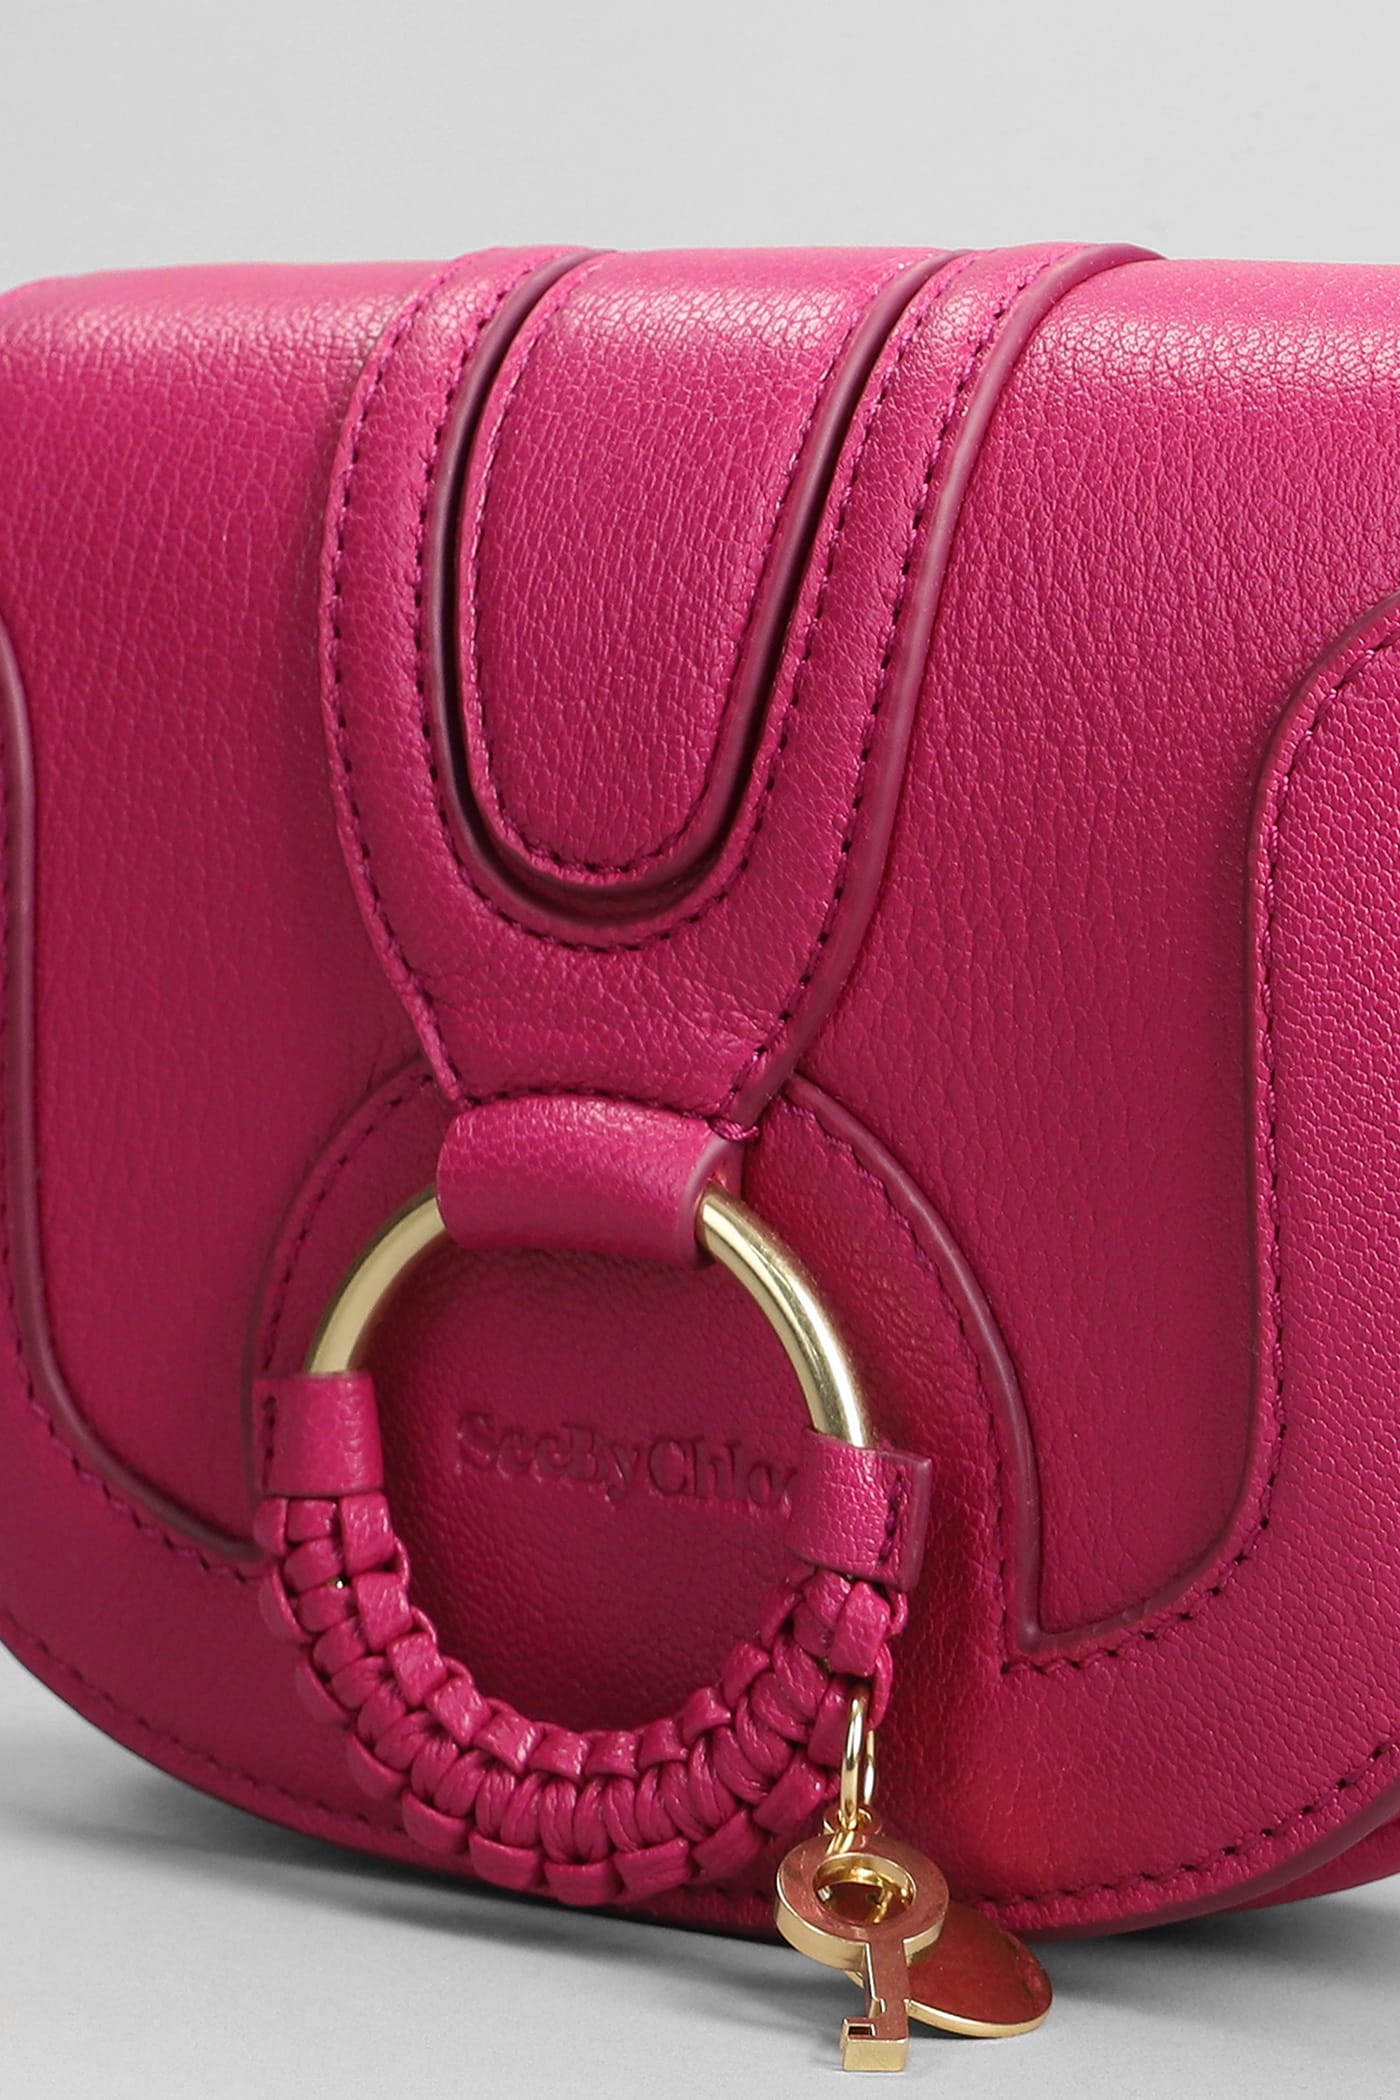 Chloé Pink Bags & Handbags for Women | Authenticity Guaranteed | eBay